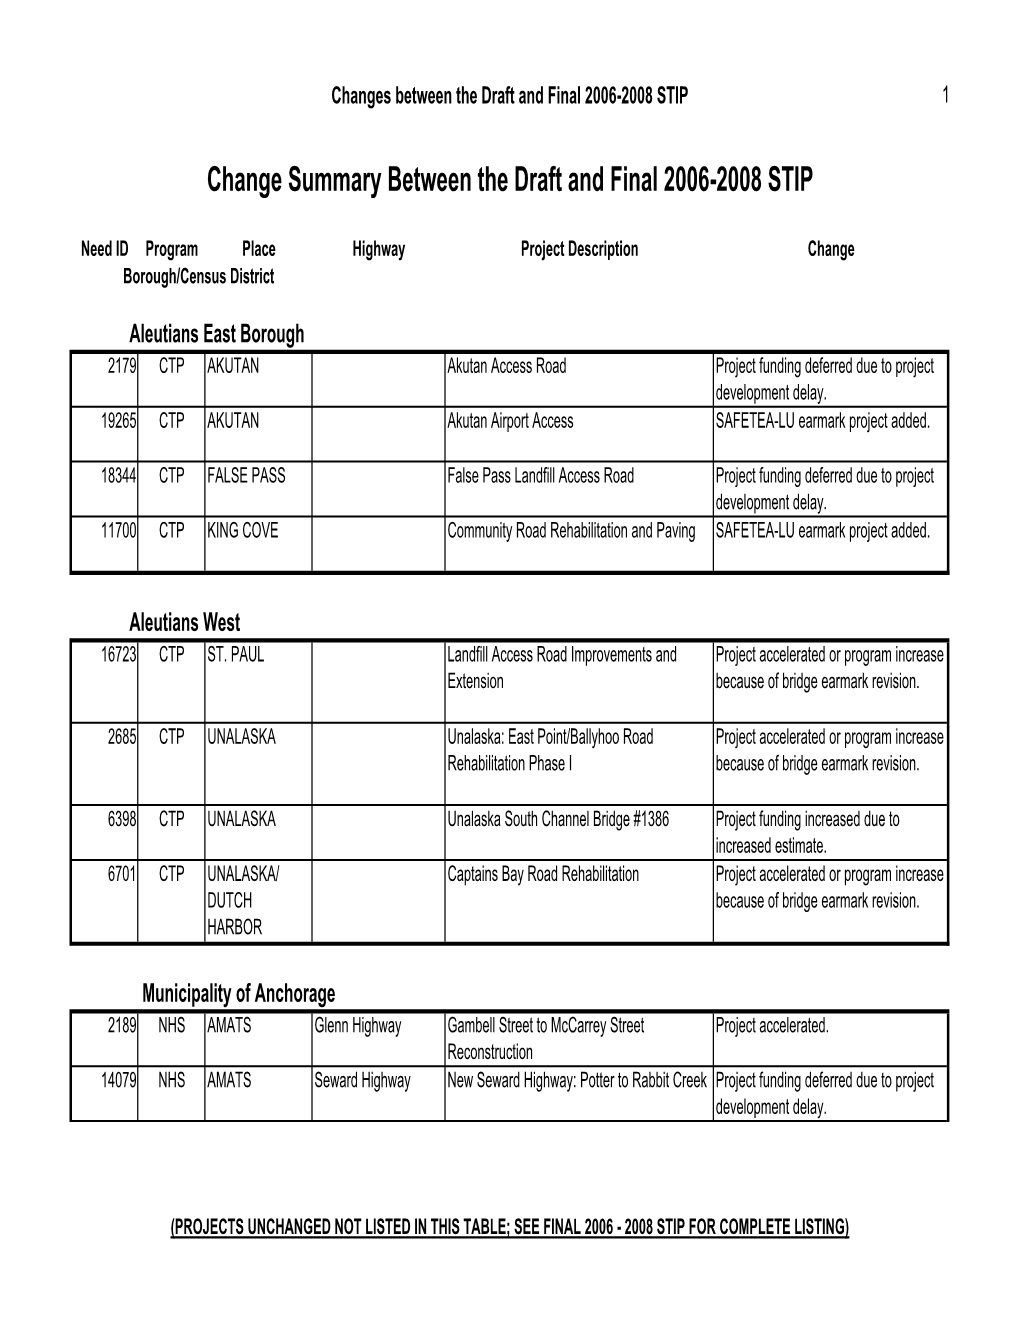 Change Summary Between the Draft and Final 2006-2008 STIP